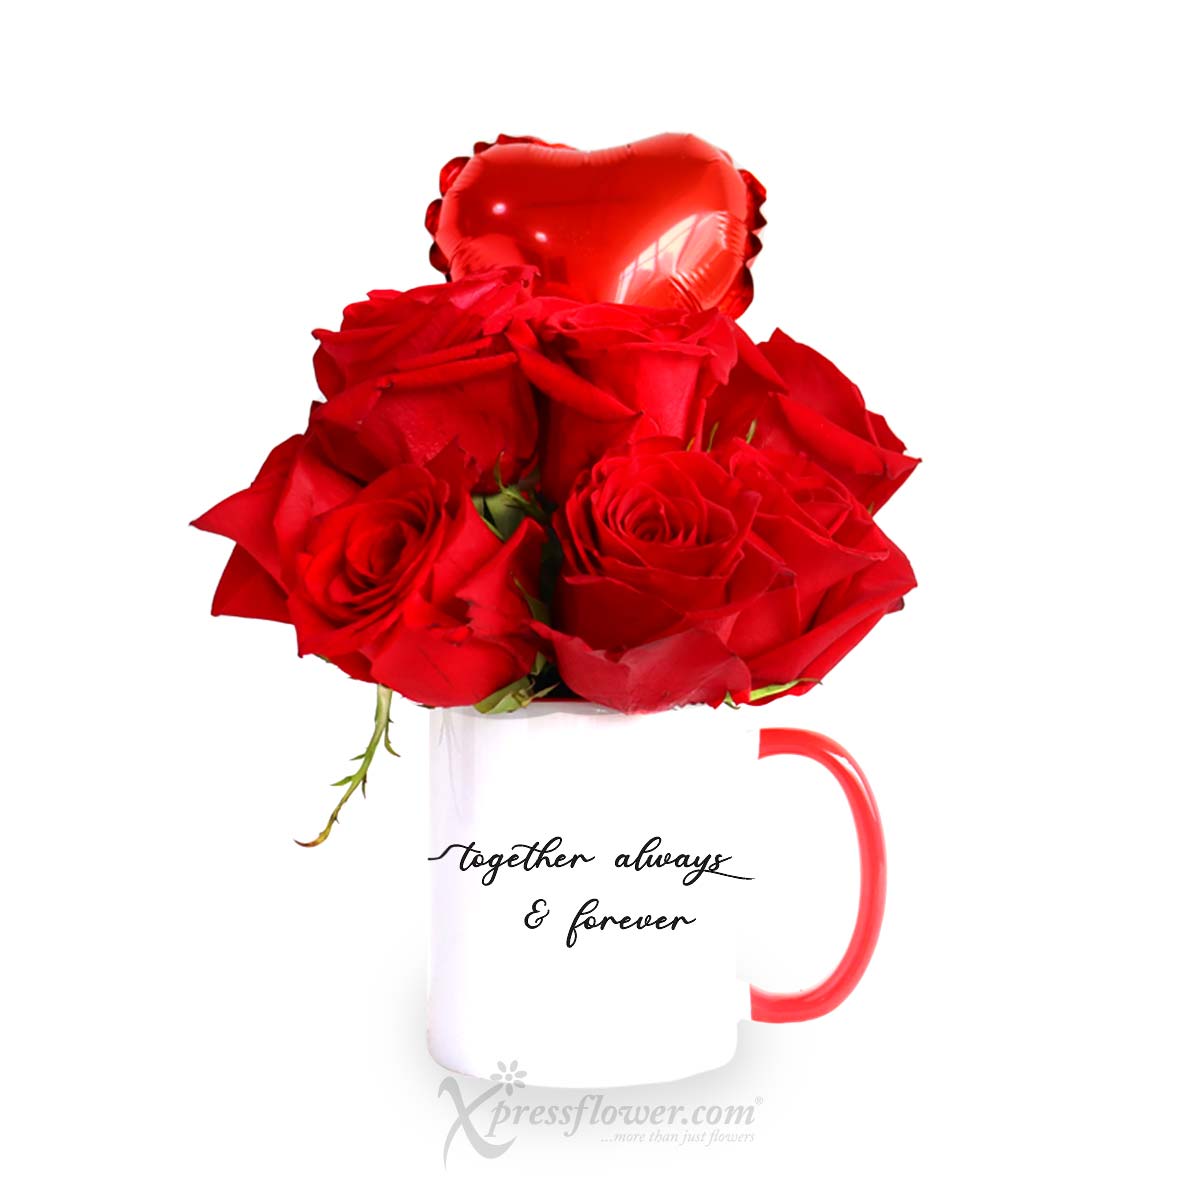 Redspot Passion (10 Red Roses with Mini Heart Balloon)